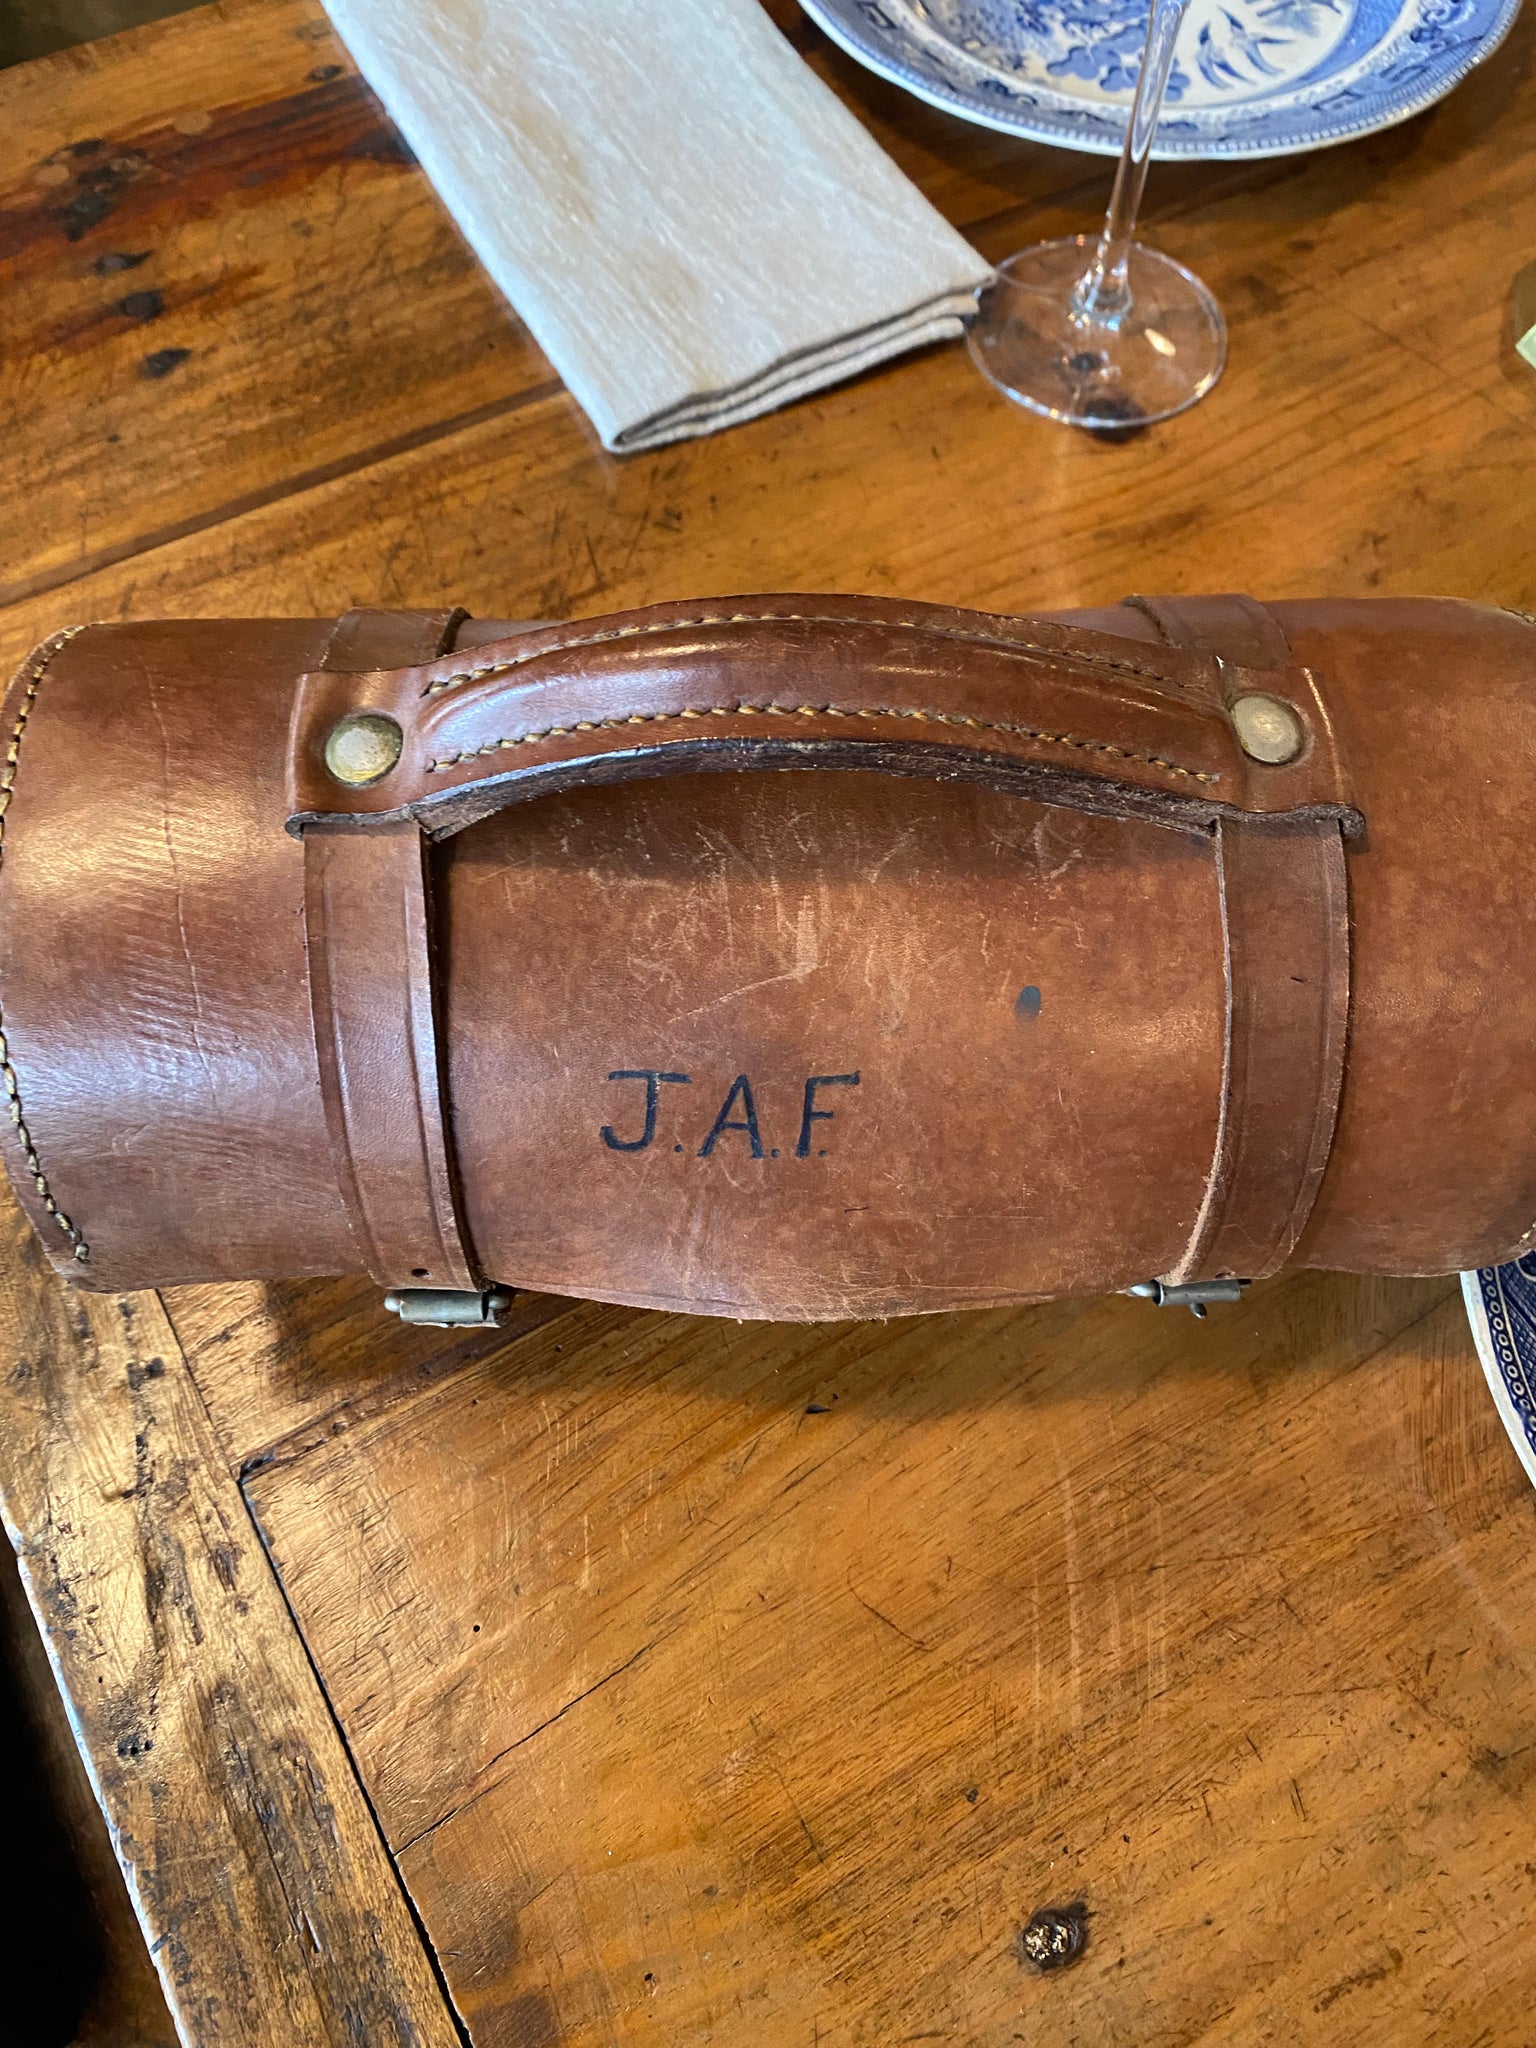 Two Lawn Bowls in a Leather Case